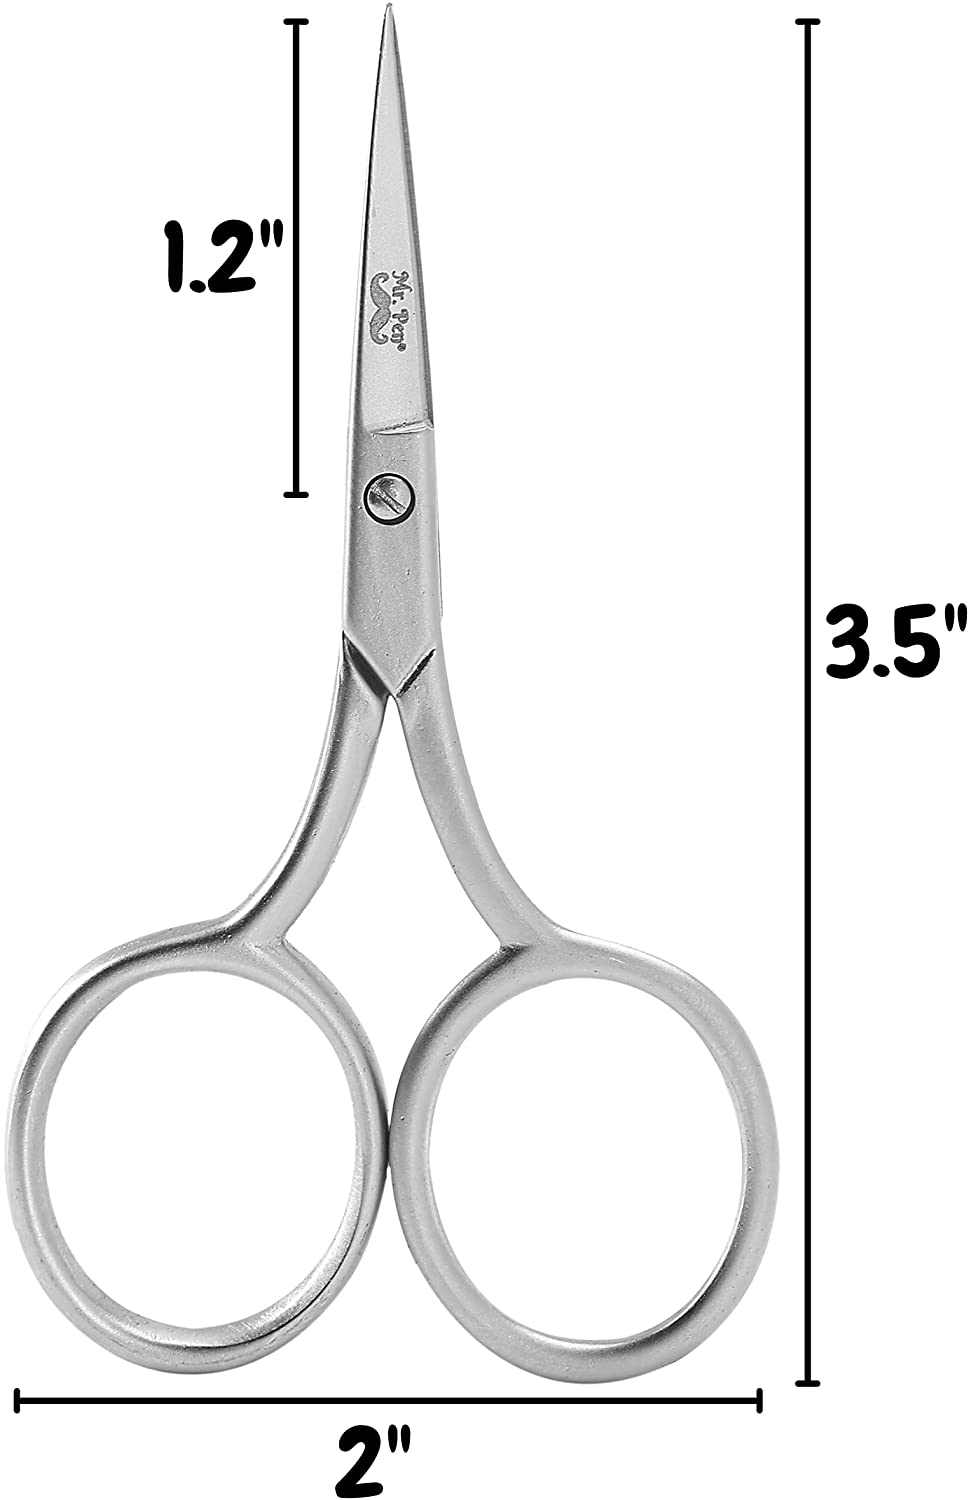 Mr. Pen- Embroidery Scissors, 3.5 inch, Sewing Scissors, Embroidery  Scissors Curved, Small Sewing Scissors 